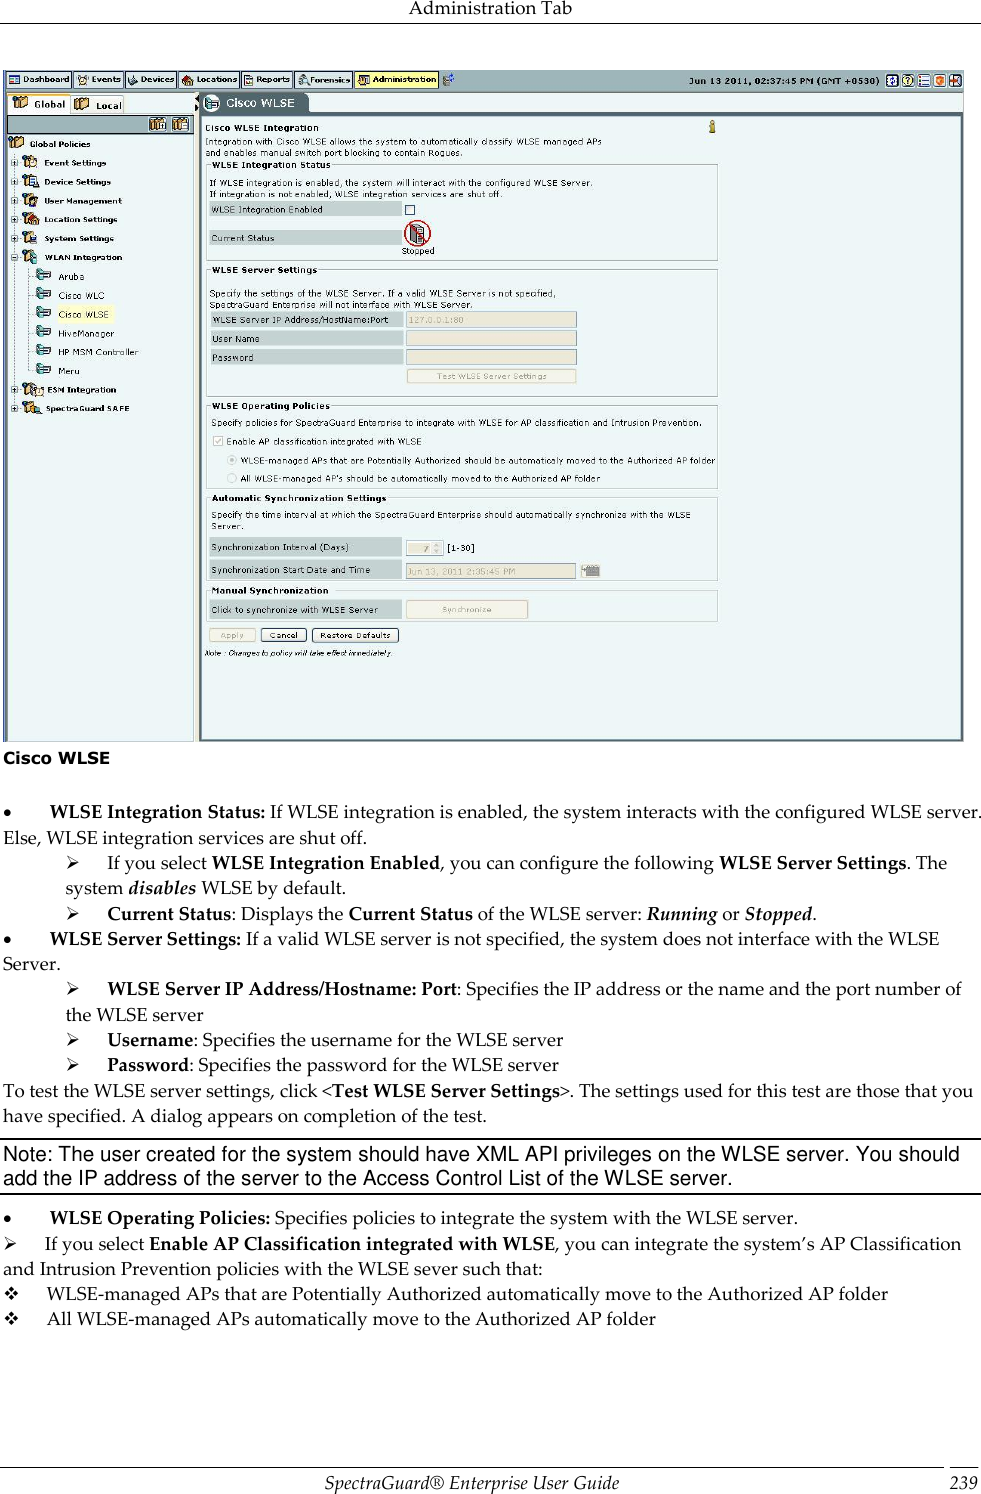 Administration Tab SpectraGuard®  Enterprise User Guide 239  Cisco WLSE             WLSE Integration Status: If WLSE integration is enabled, the system interacts with the configured WLSE server. Else, WLSE integration services are shut off.        If you select WLSE Integration Enabled, you can configure the following WLSE Server Settings. The system disables WLSE by default.        Current Status: Displays the Current Status of the WLSE server: Running or Stopped.           WLSE Server Settings: If a valid WLSE server is not specified, the system does not interface with the WLSE Server.        WLSE Server IP Address/Hostname: Port: Specifies the IP address or the name and the port number of the WLSE server        Username: Specifies the username for the WLSE server        Password: Specifies the password for the WLSE server To test the WLSE server settings, click &lt;Test WLSE Server Settings&gt;. The settings used for this test are those that you have specified. A dialog appears on completion of the test. Note: The user created for the system should have XML API privileges on the WLSE server. You should add the IP address of the server to the Access Control List of the WLSE server.           WLSE Operating Policies: Specifies policies to integrate the system with the WLSE server.        If you select Enable AP Classification integrated with WLSE, you can integrate the system’s AP Classification and Intrusion Prevention policies with the WLSE sever such that:        WLSE-managed APs that are Potentially Authorized automatically move to the Authorized AP folder        All WLSE-managed APs automatically move to the Authorized AP folder 